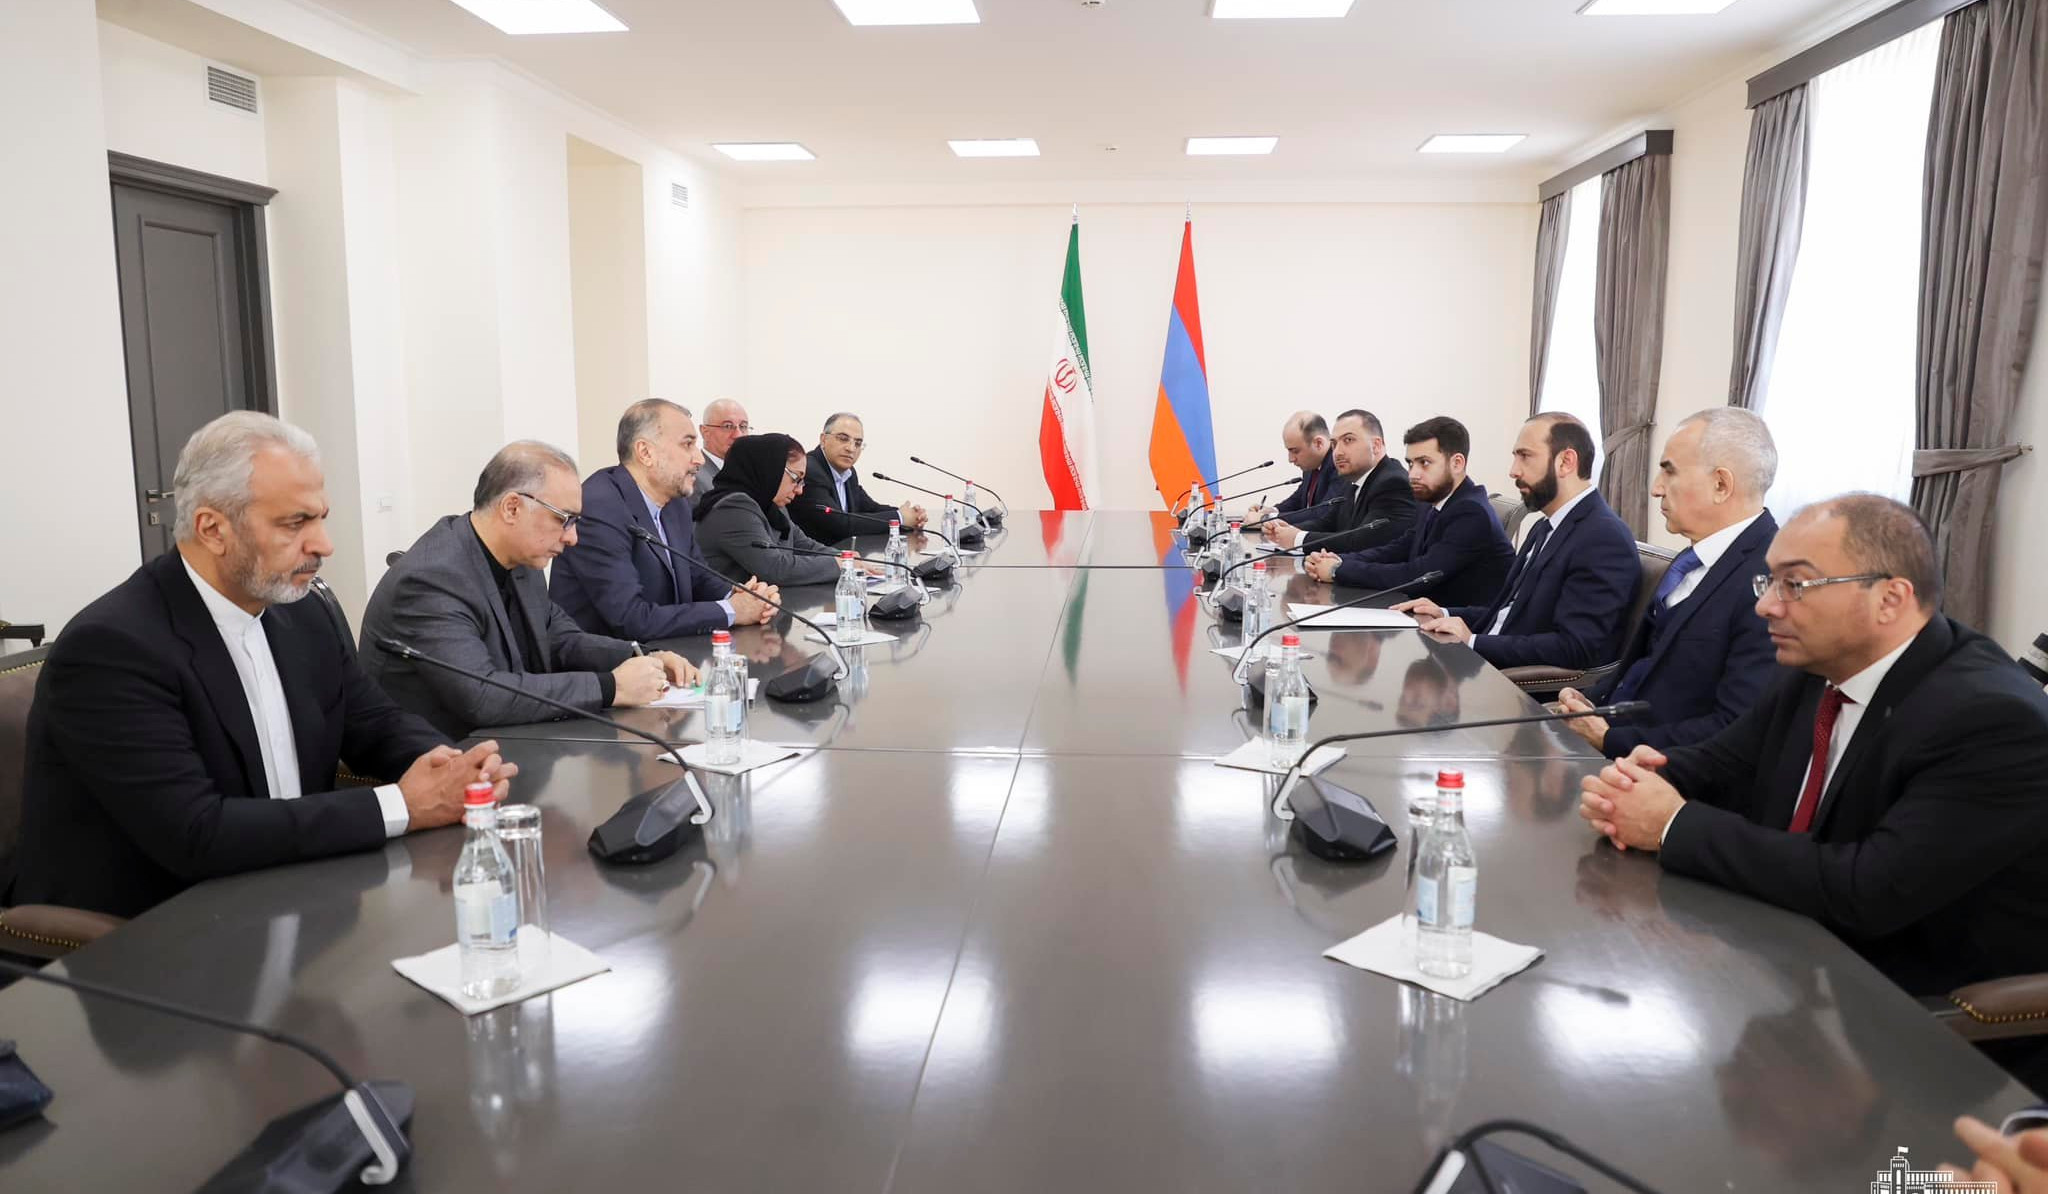 Enlarged meeting of Foreign Ministers of Armenia and Iran underway